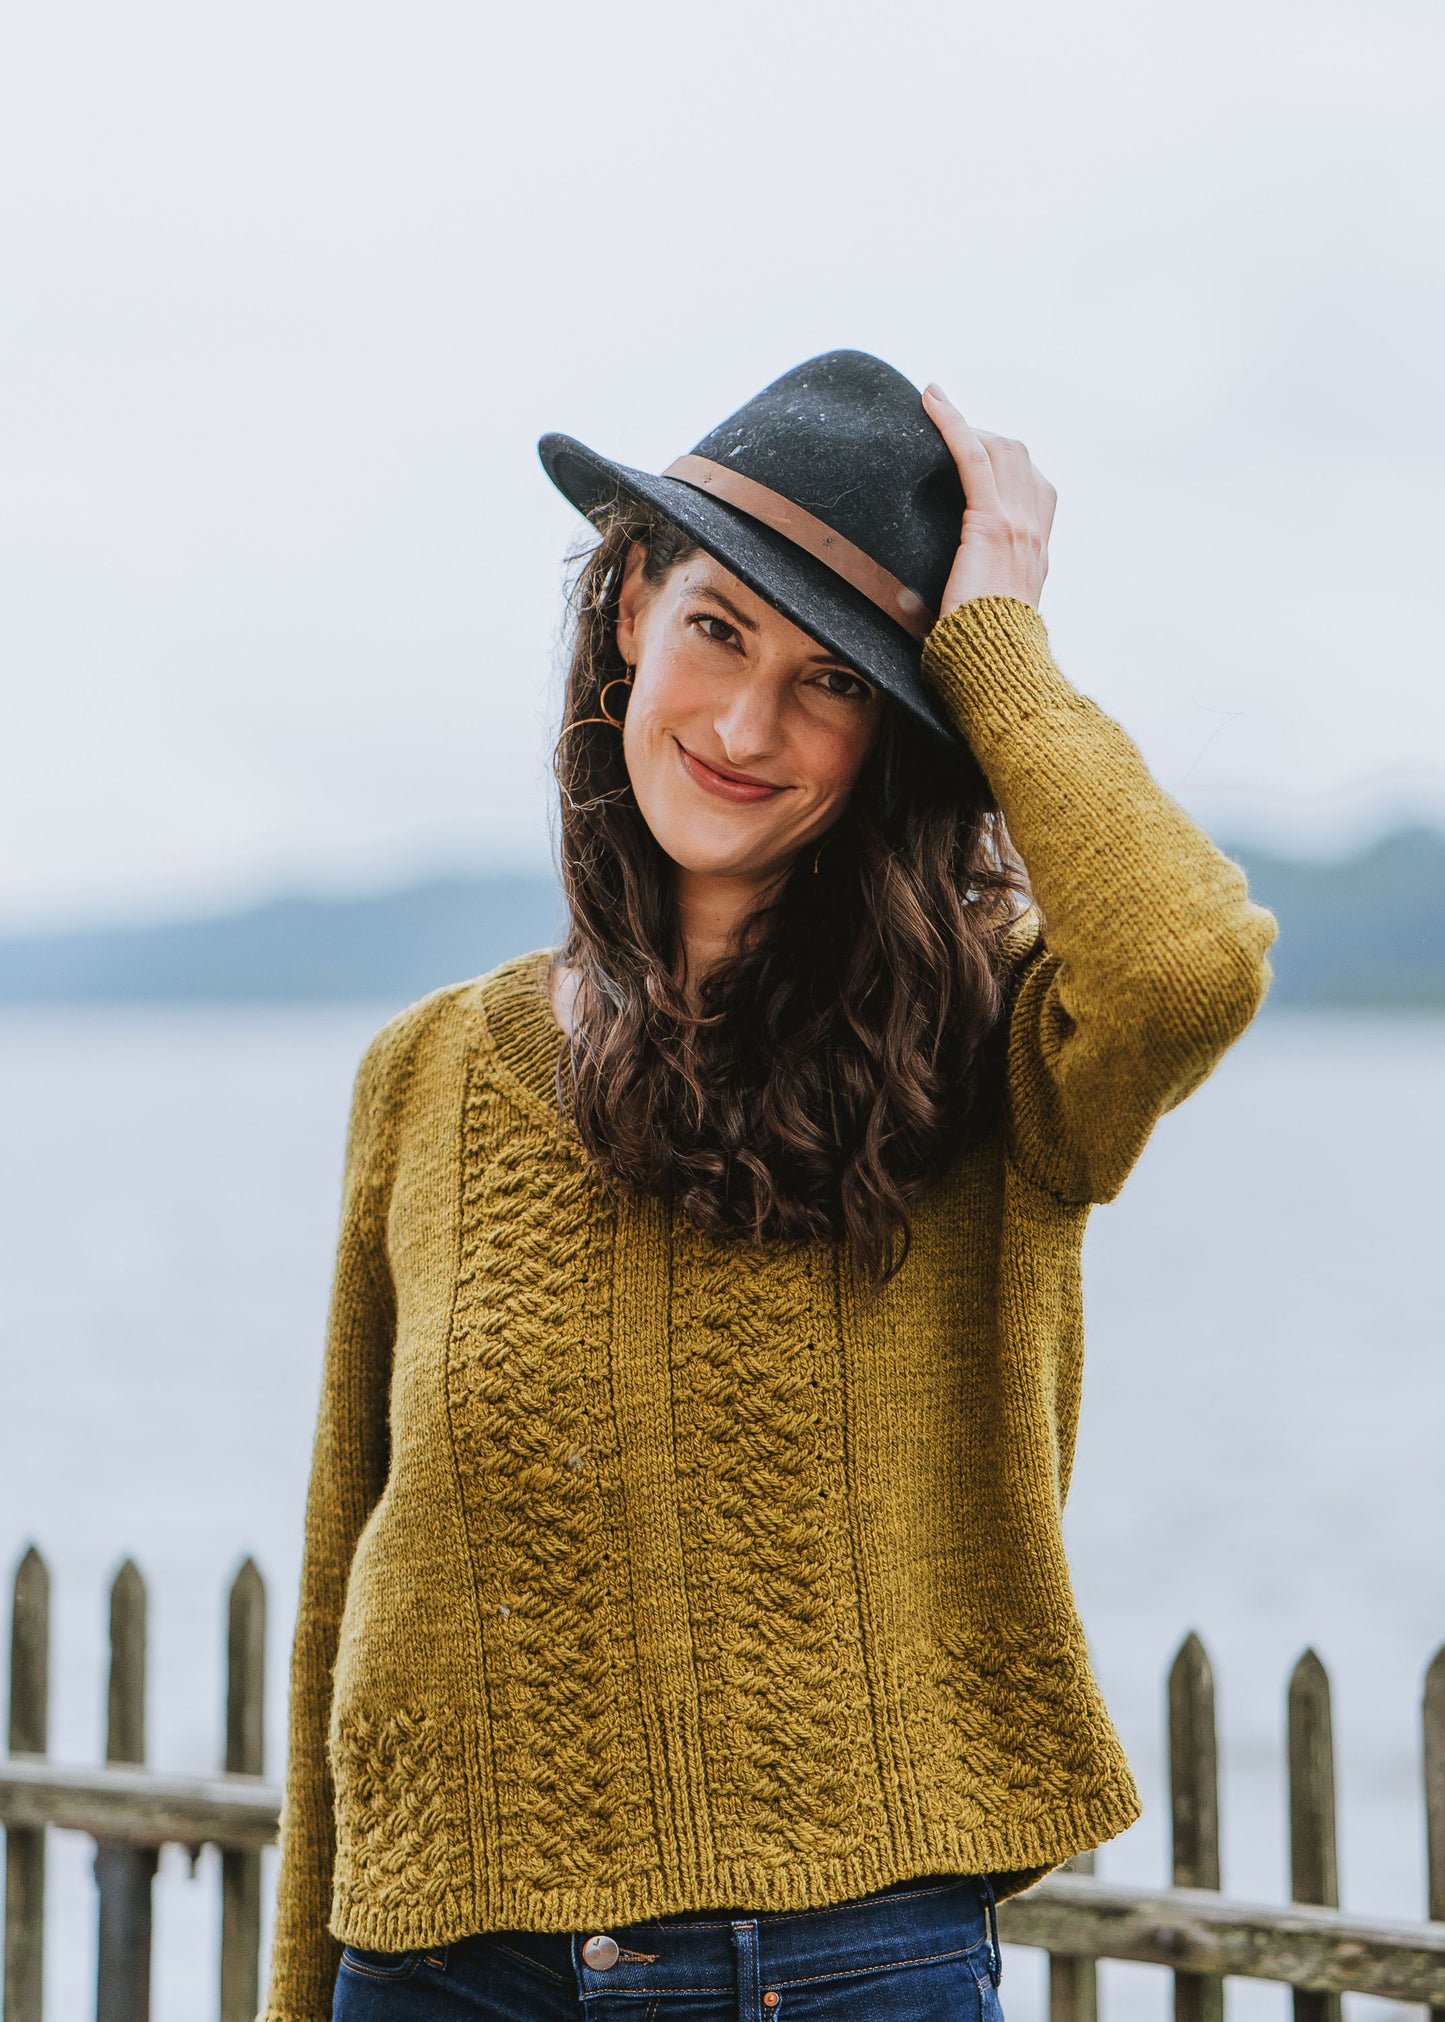 Laura smiles at the camera, one hand on her hat. Her golden hand knit sweater features cable details down the front and around the hem. 